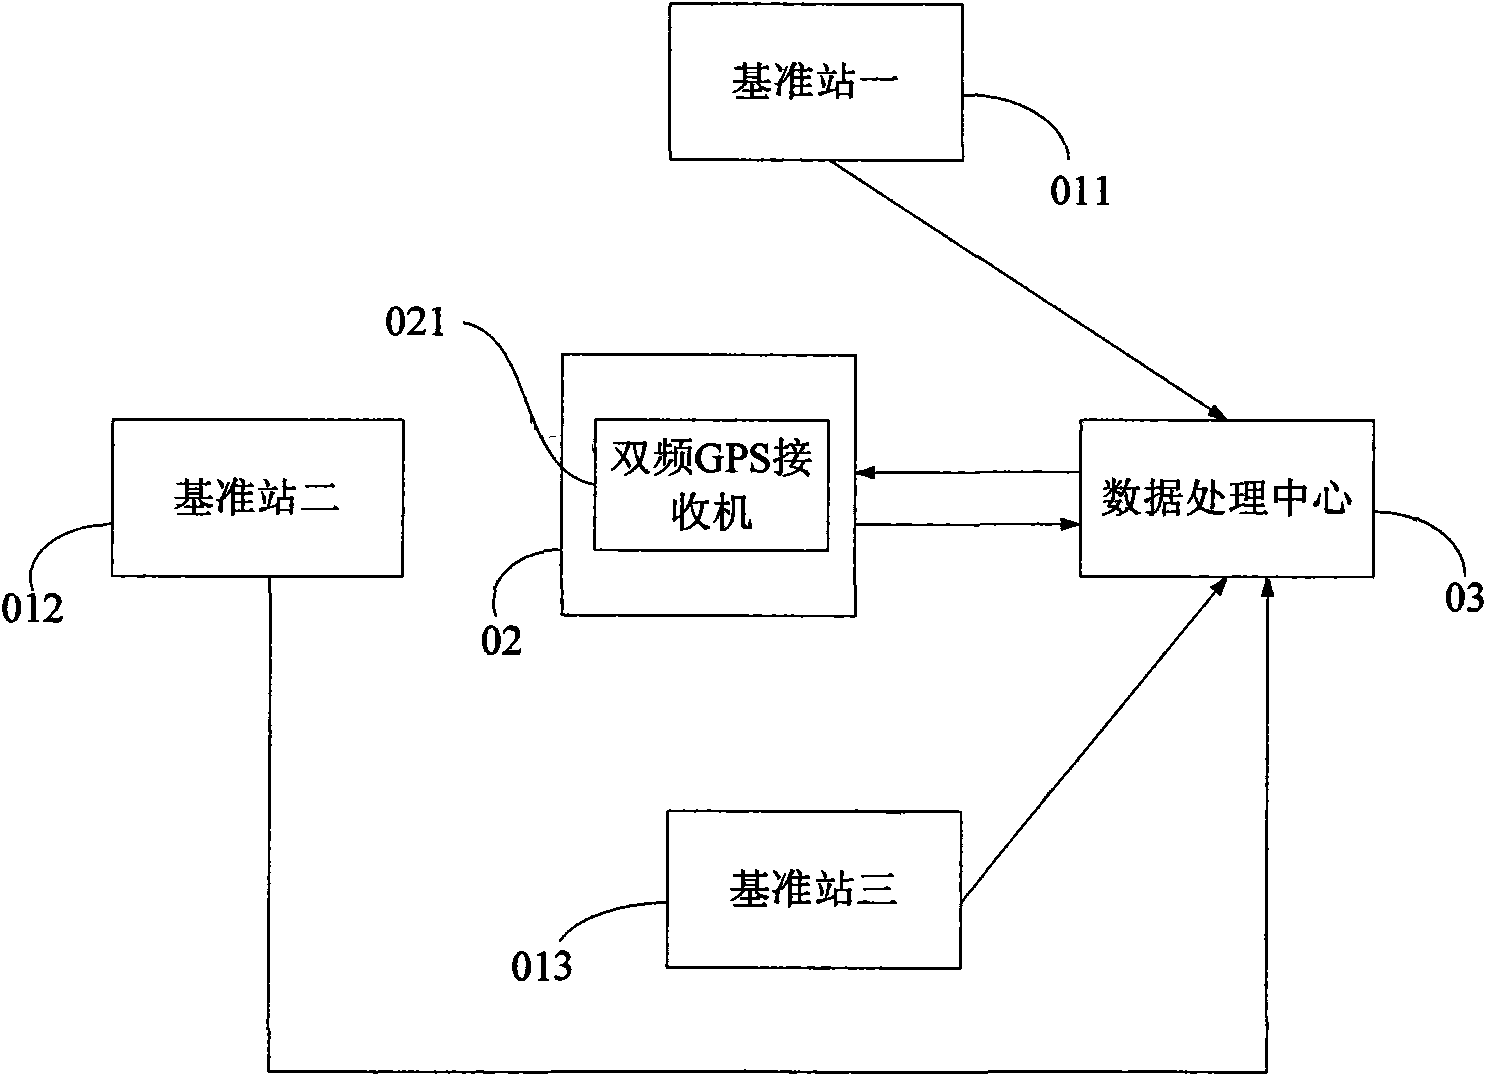 Double-frequency GPS receiver and CORS system